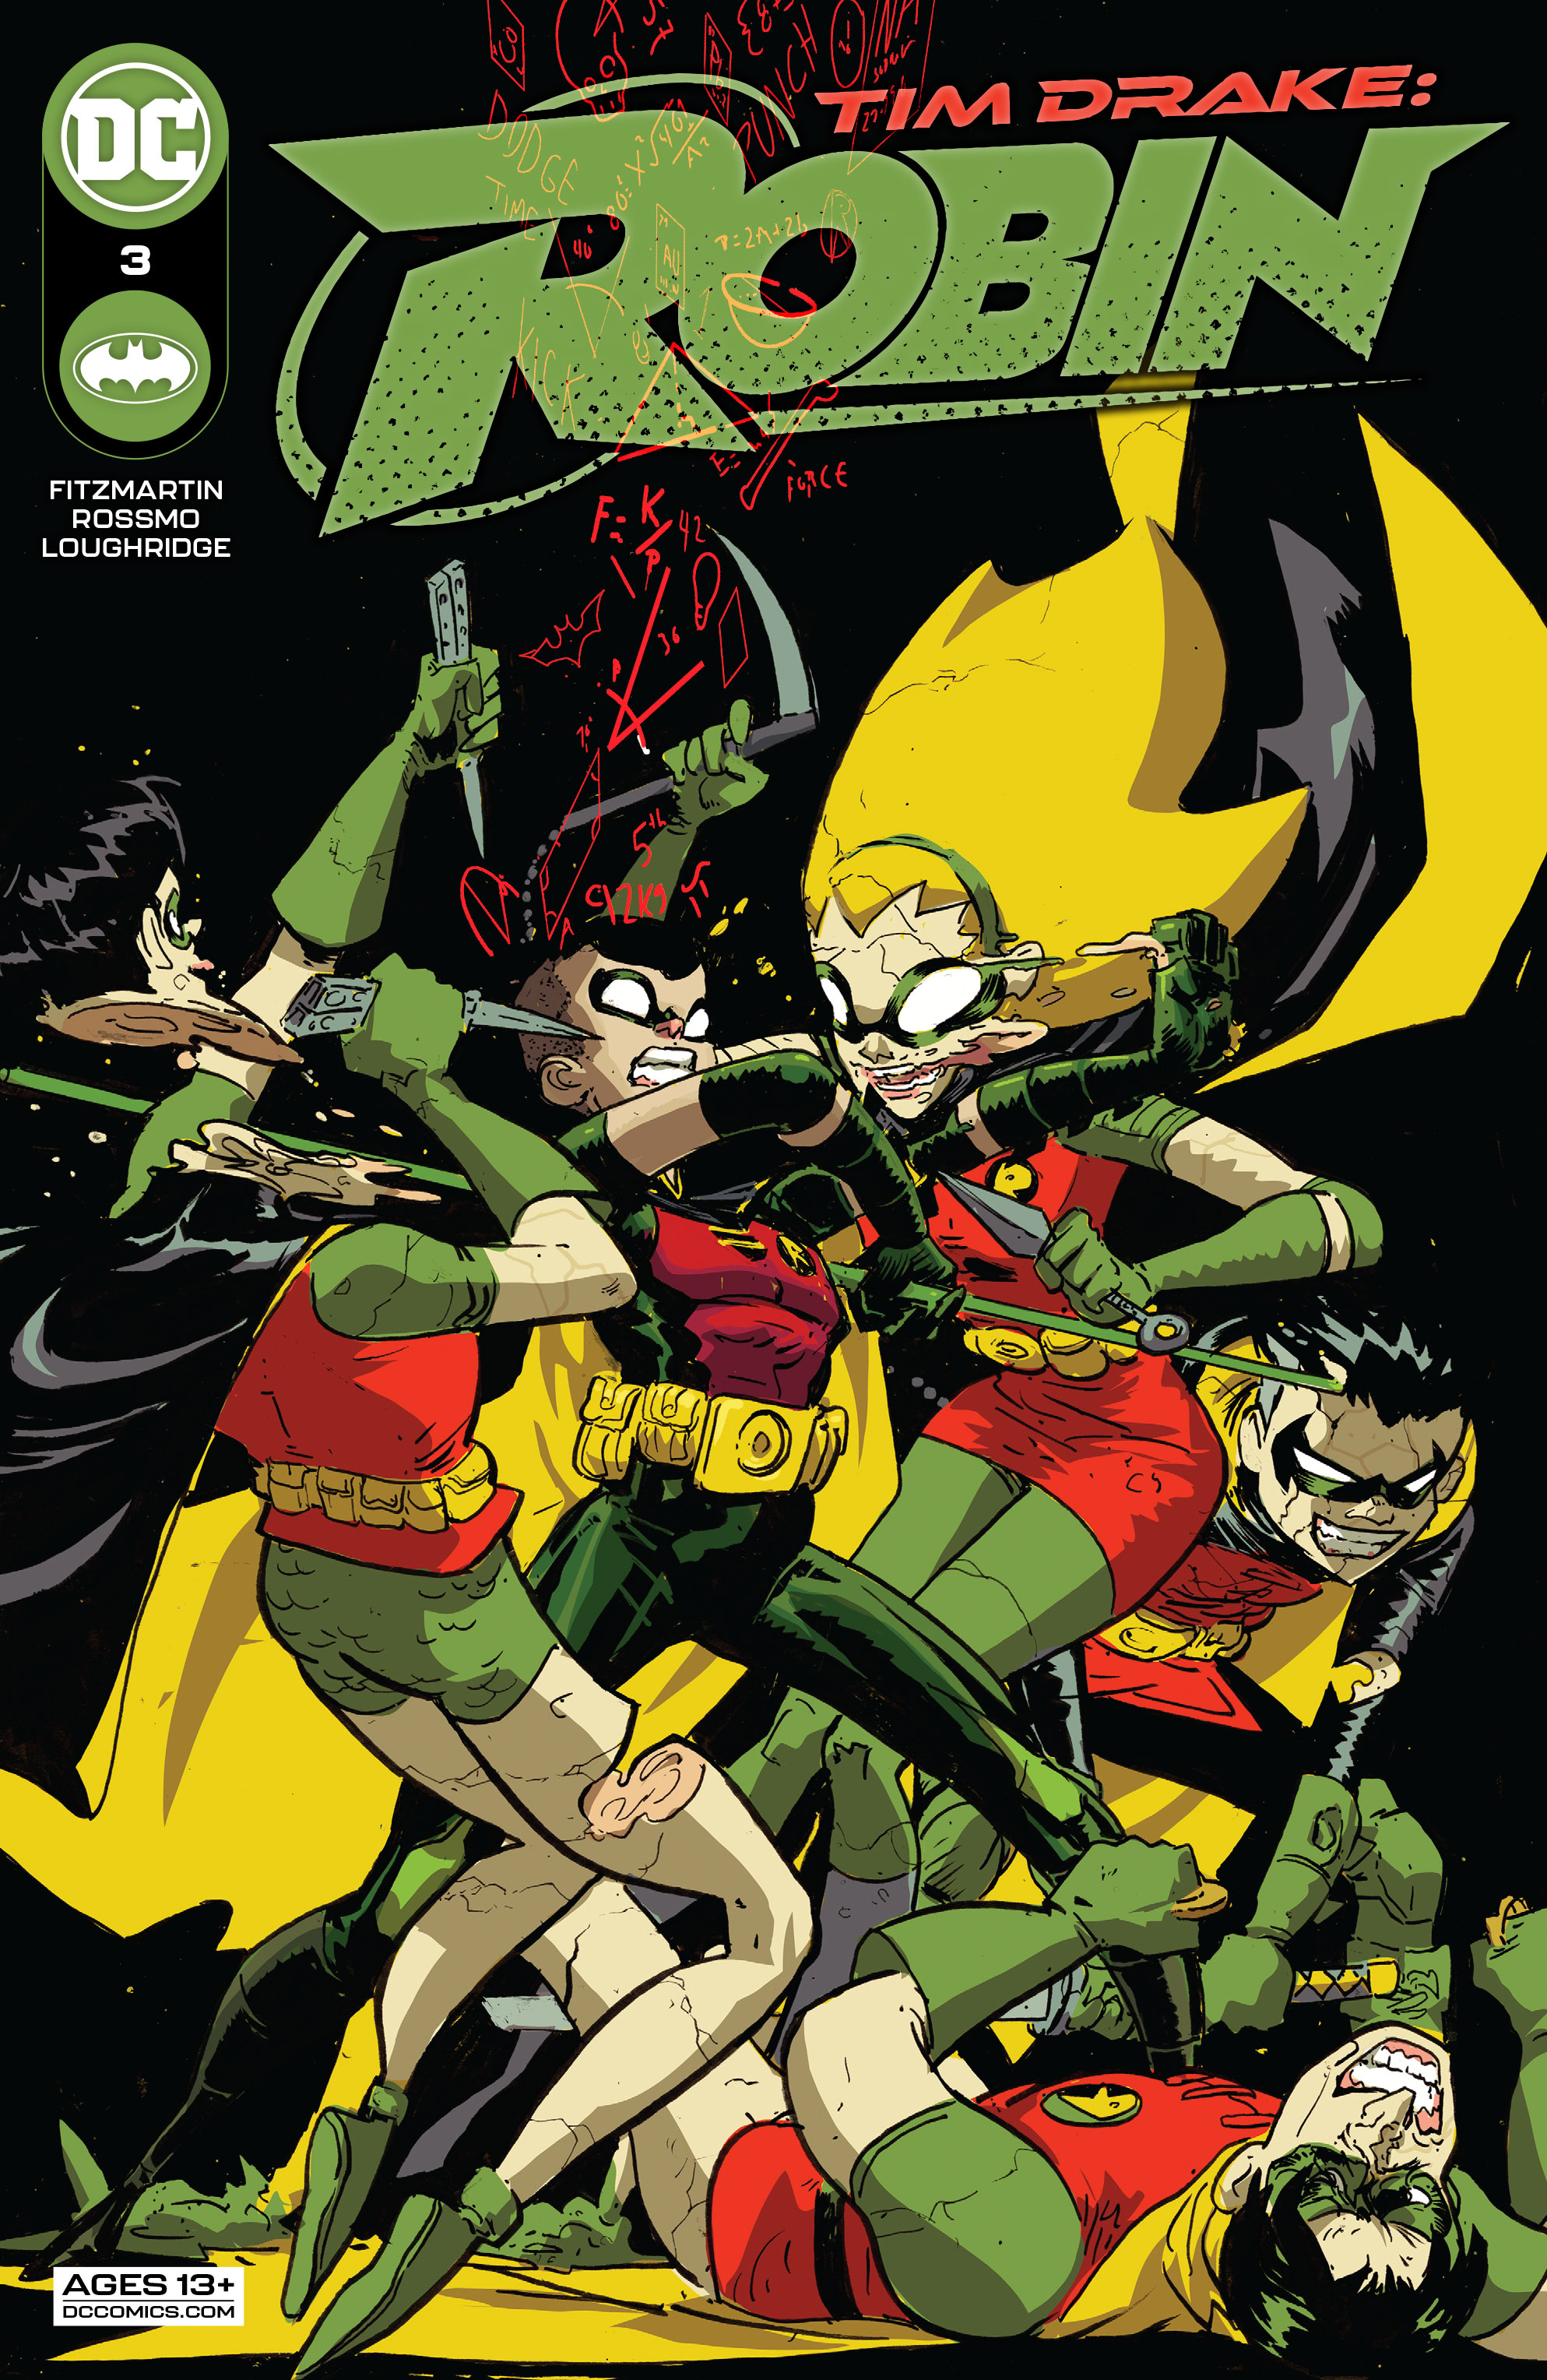 Robin Just Came Out as Queer in a New 'Batman' Comic